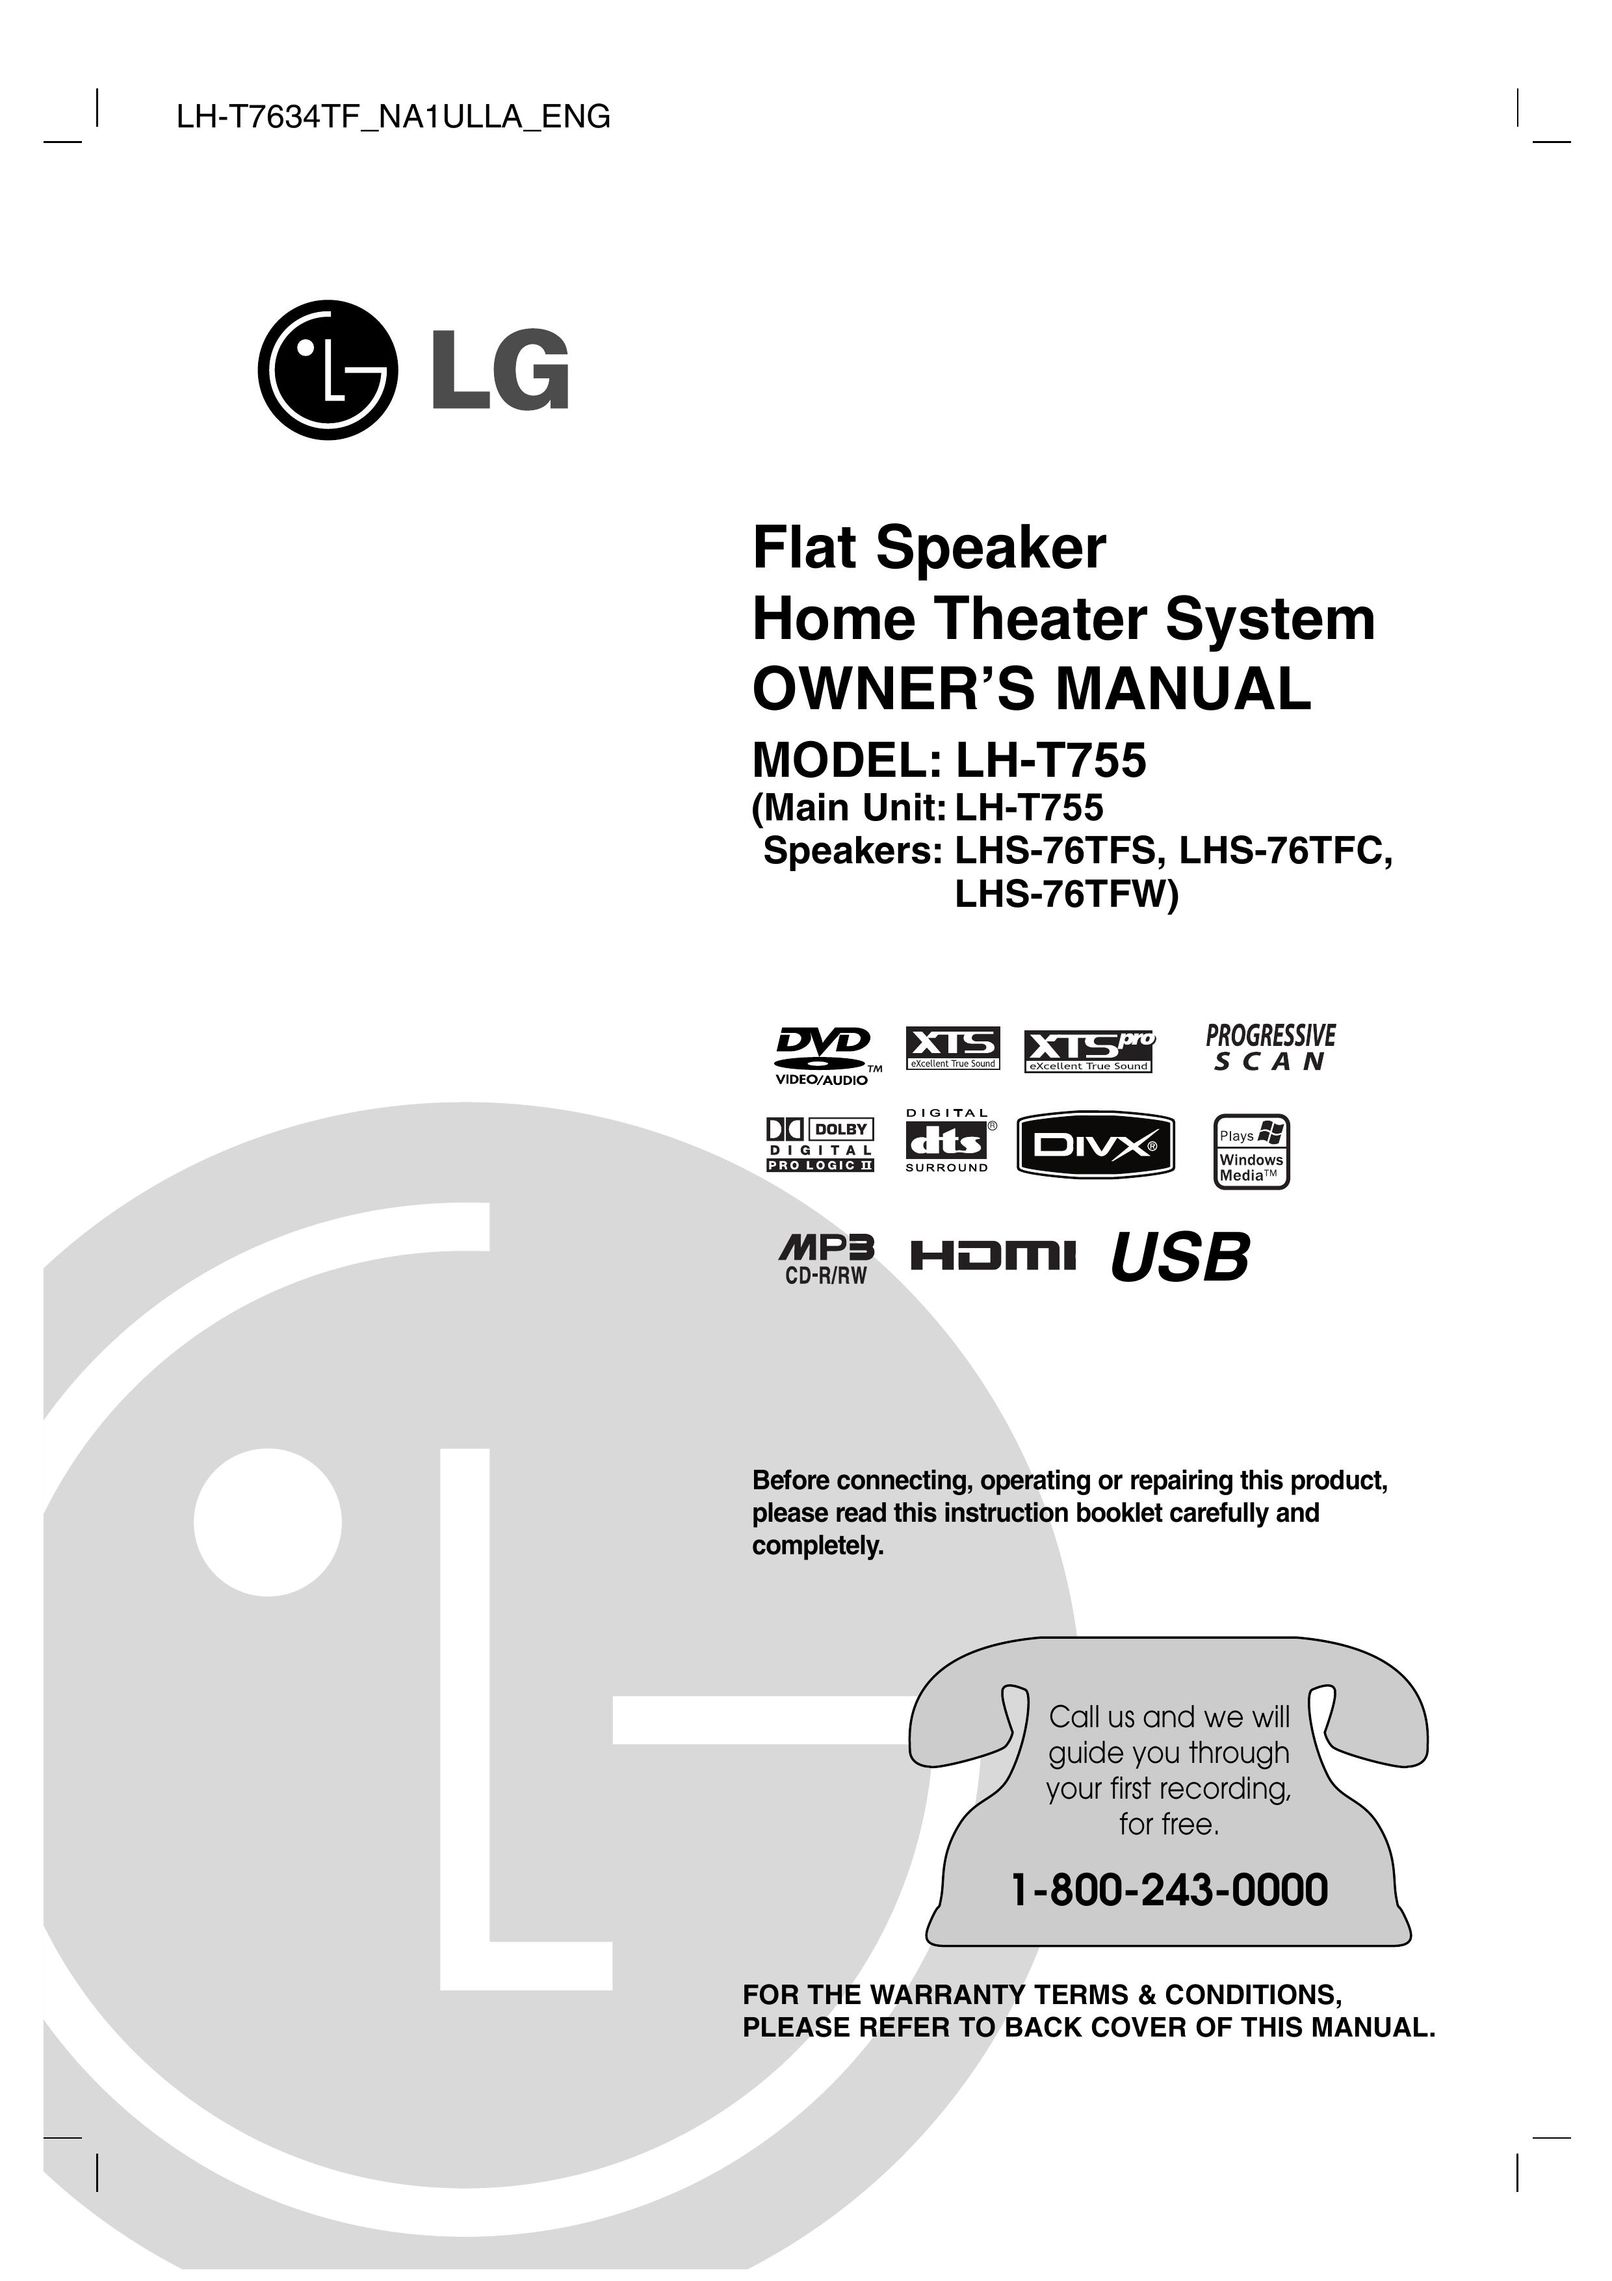 LG Electronics LH-T755 Home Theater System User Manual